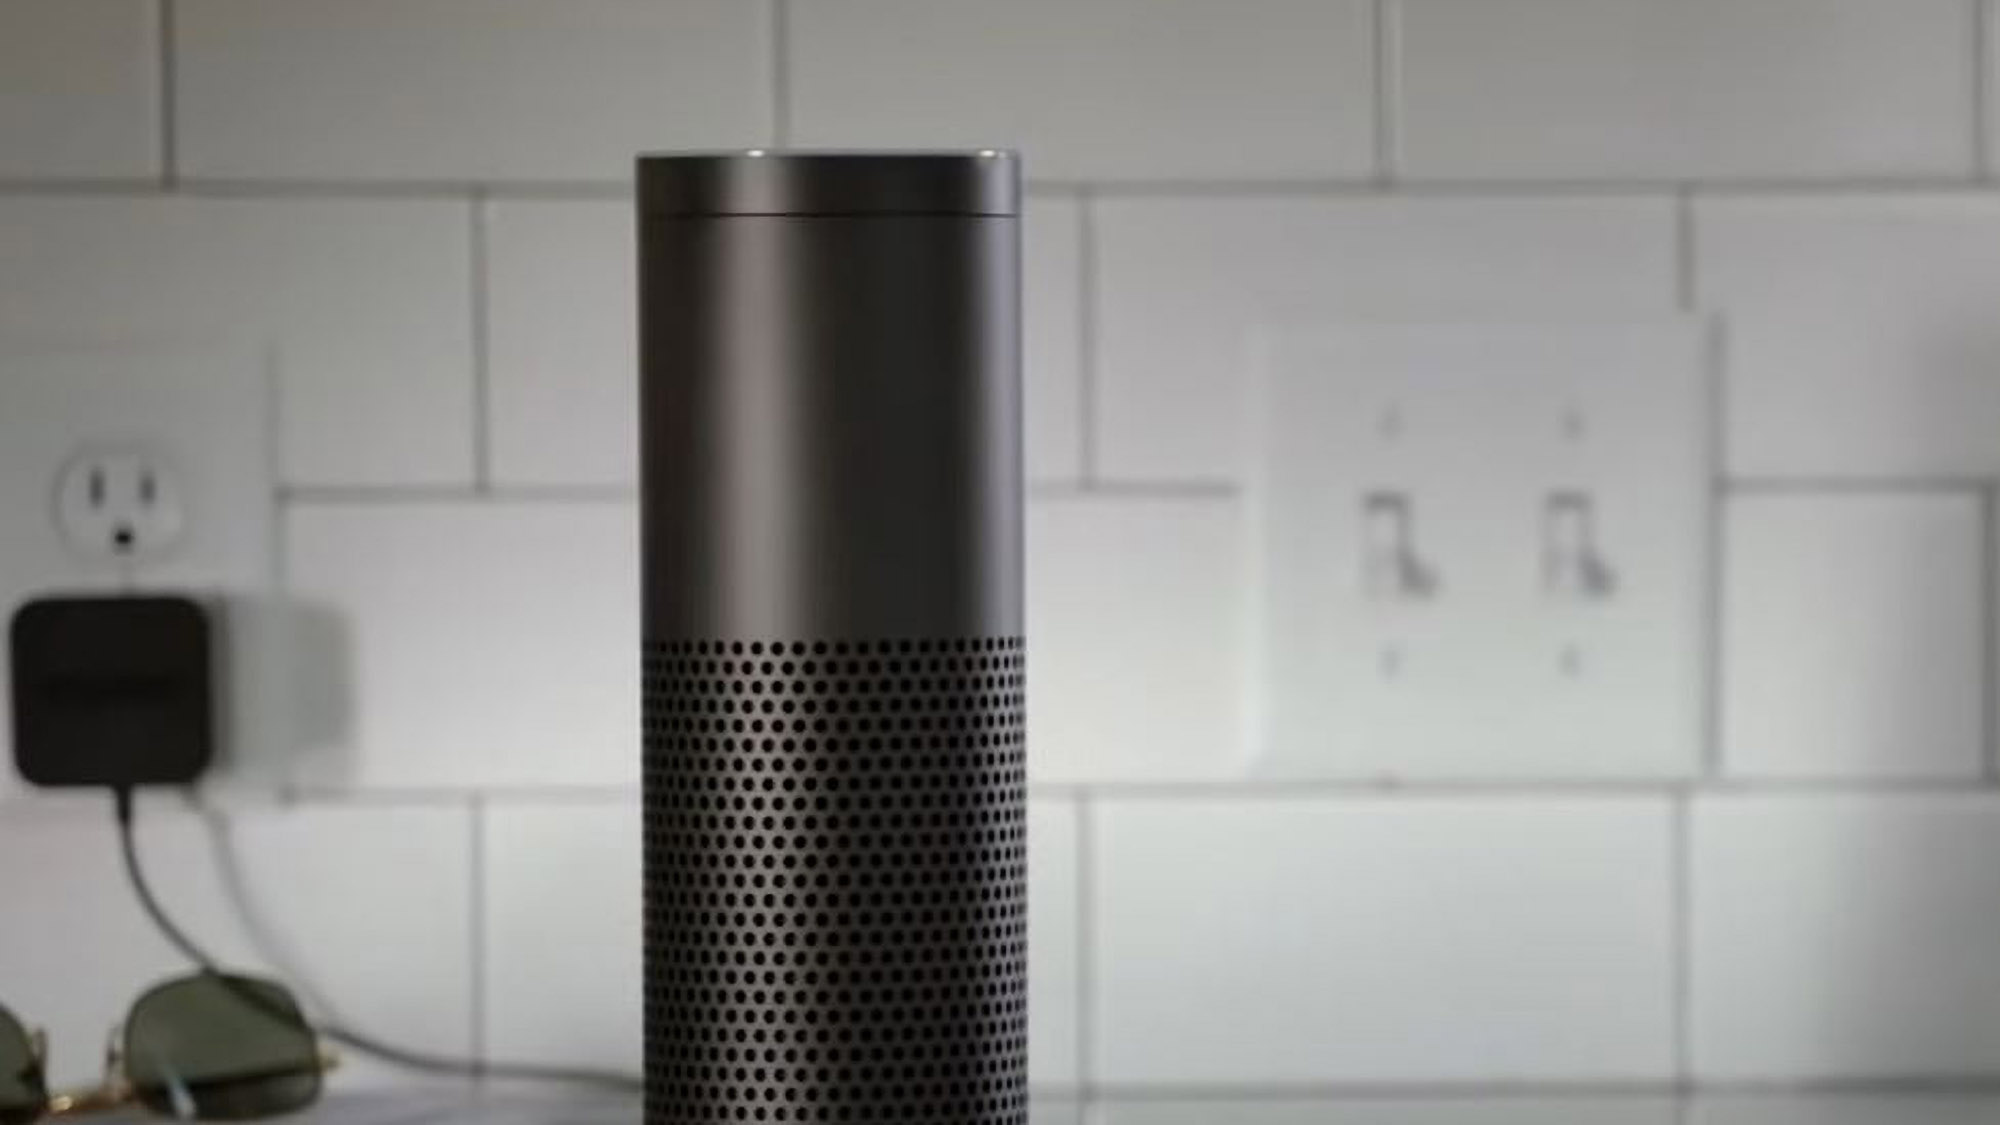 Read more about the article Bullied Six-Year-Old Alexa Goes To Court To Change Name